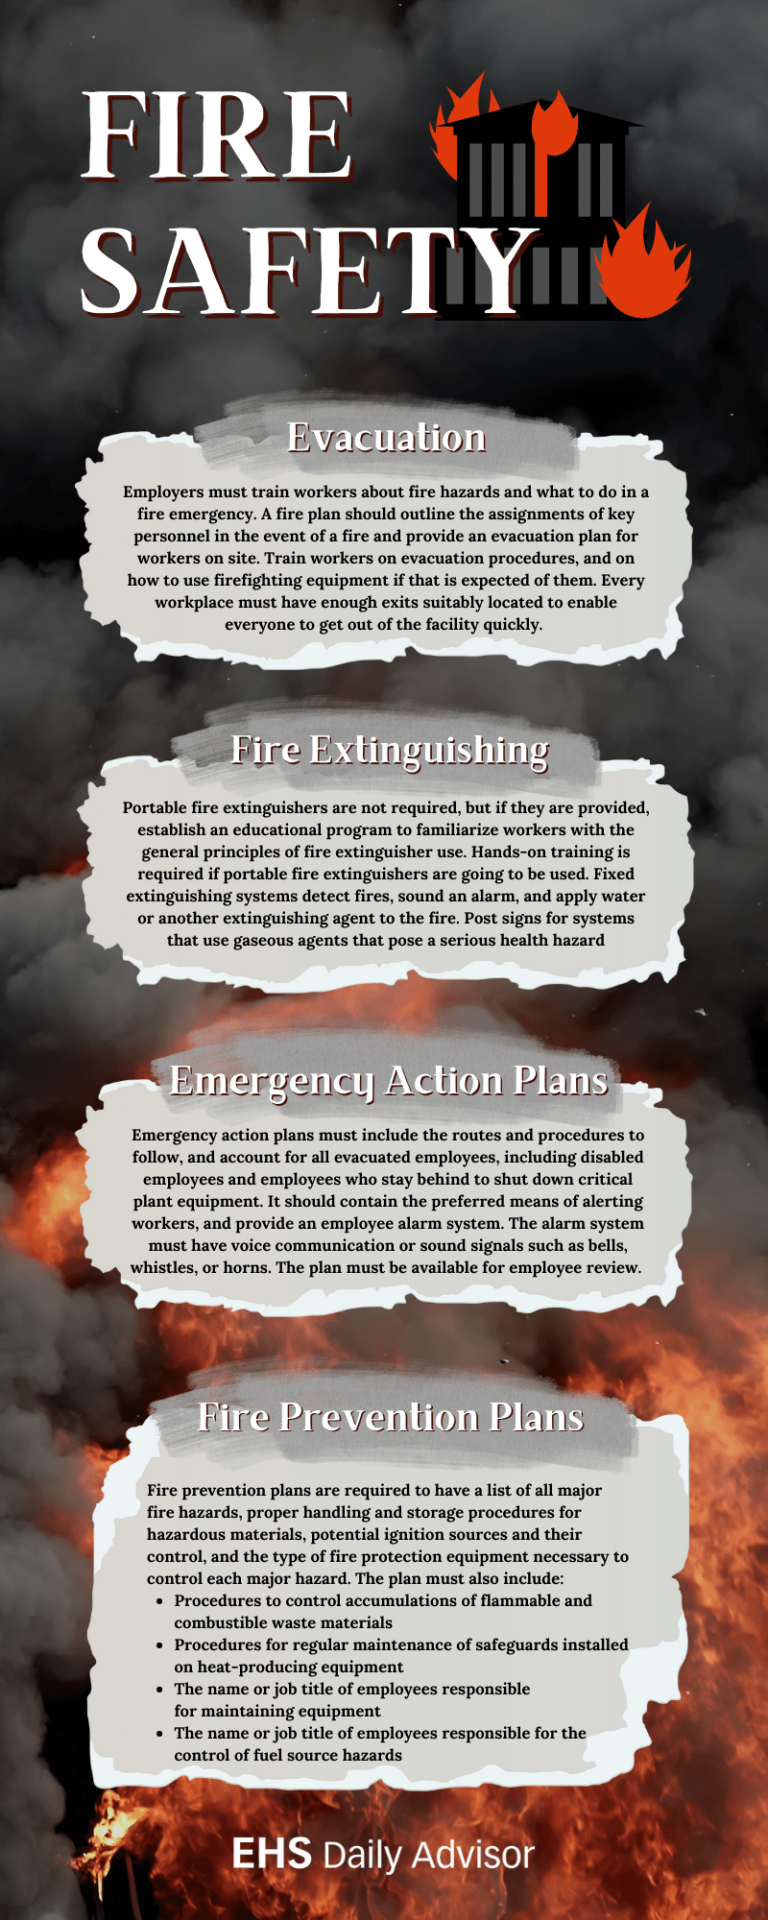 Fire Safety Infographic 768x1920 